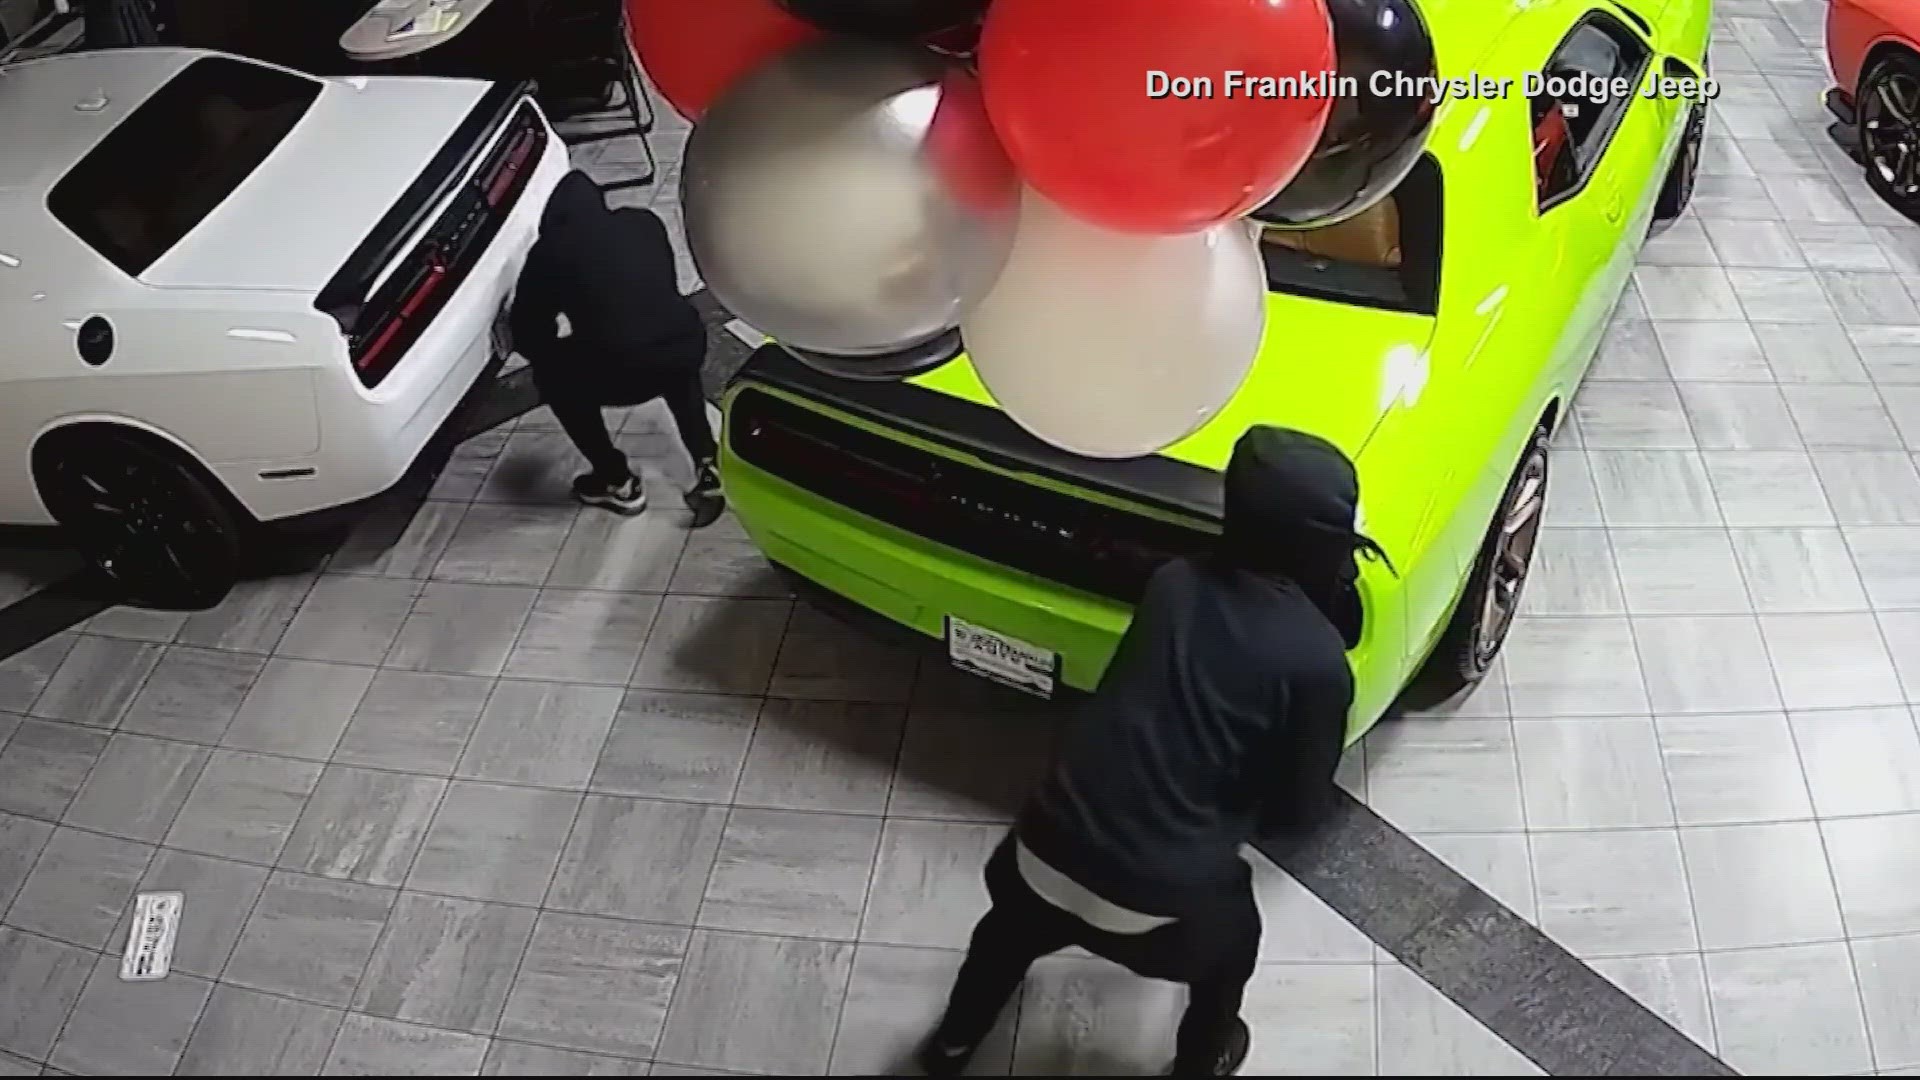 Thieves broke into a dealership in Somerset, Kentucky. They climbed inside brand new Dodge Challenger Hellcats and drove them off the showroom lot.